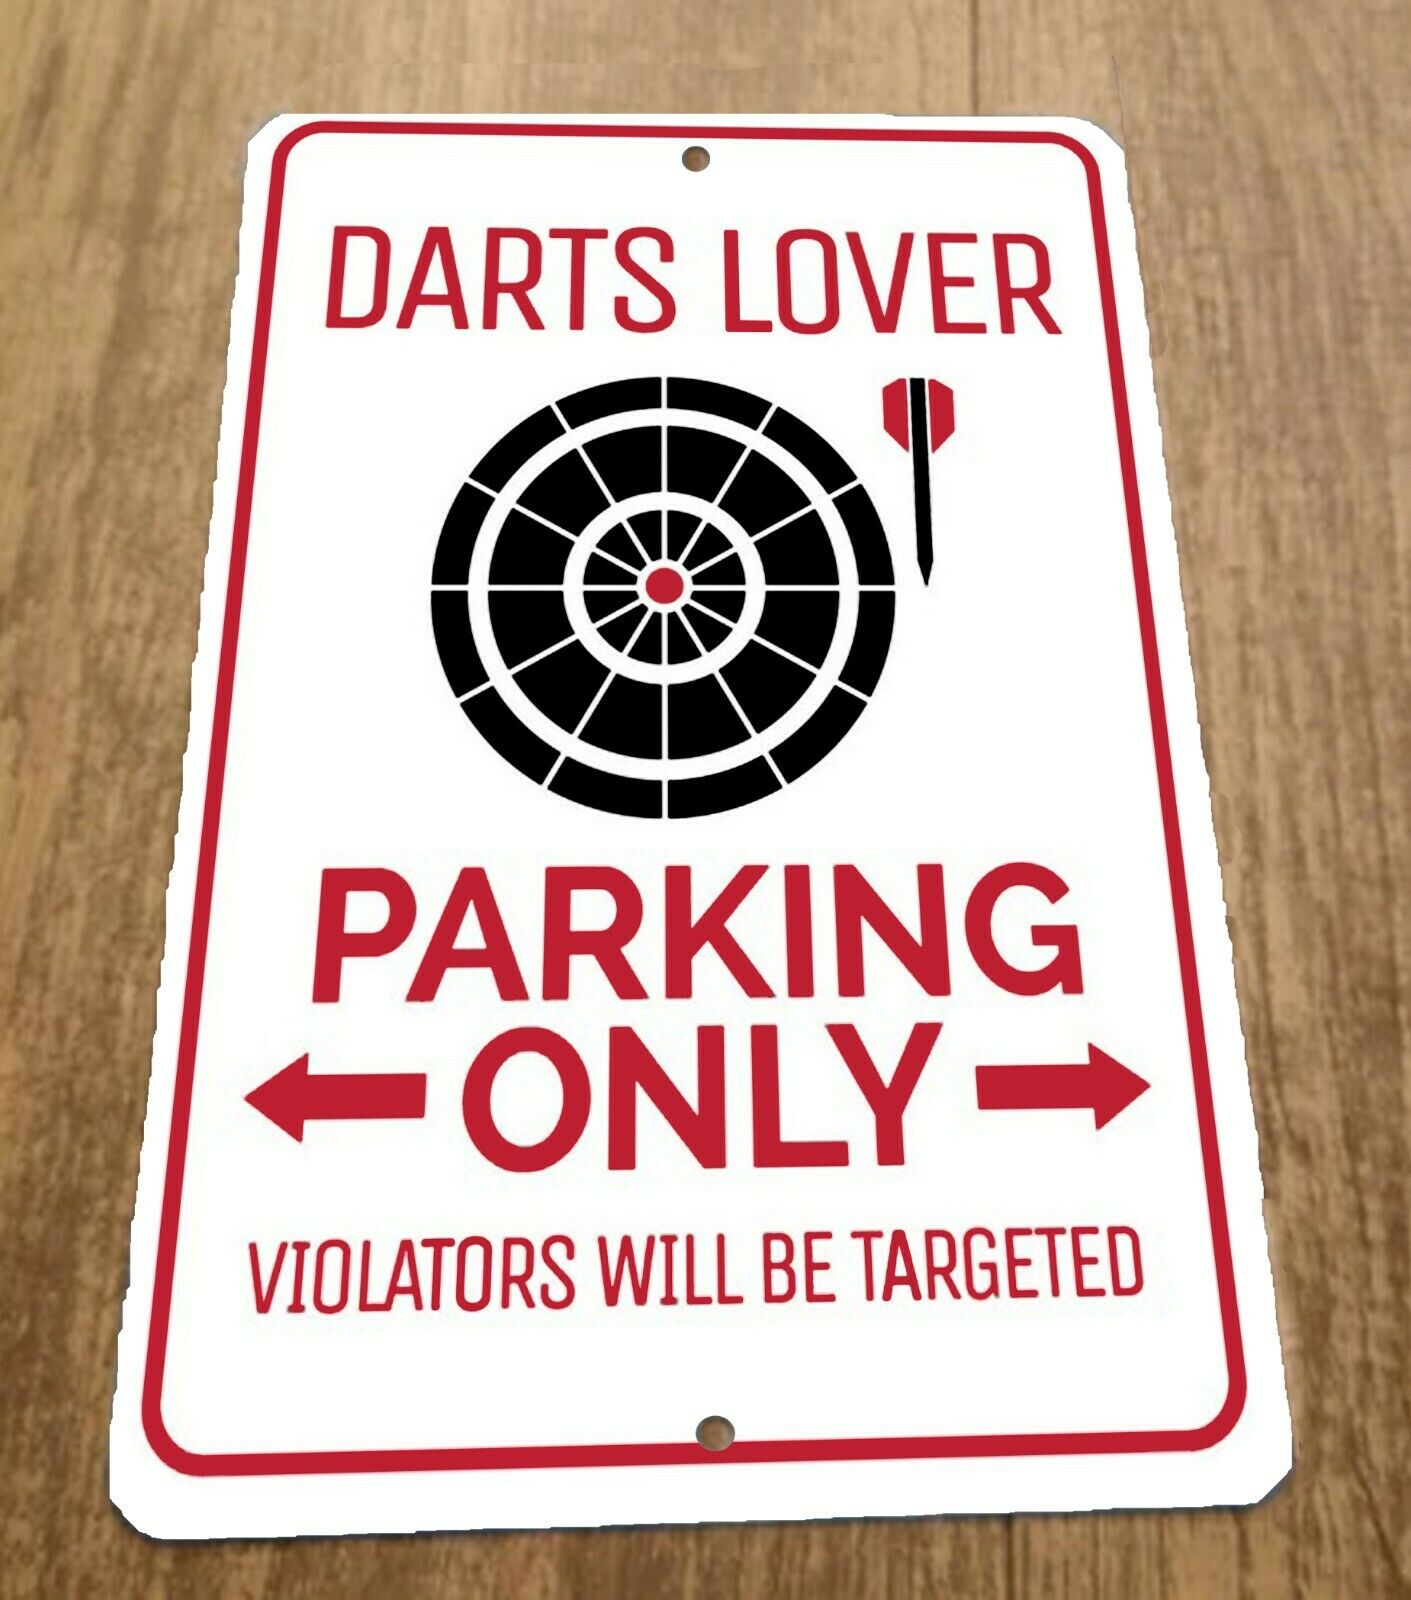 Darts Lover Parking Only  8x12 Metal Wall Entertainment Sports Room Bar Sign